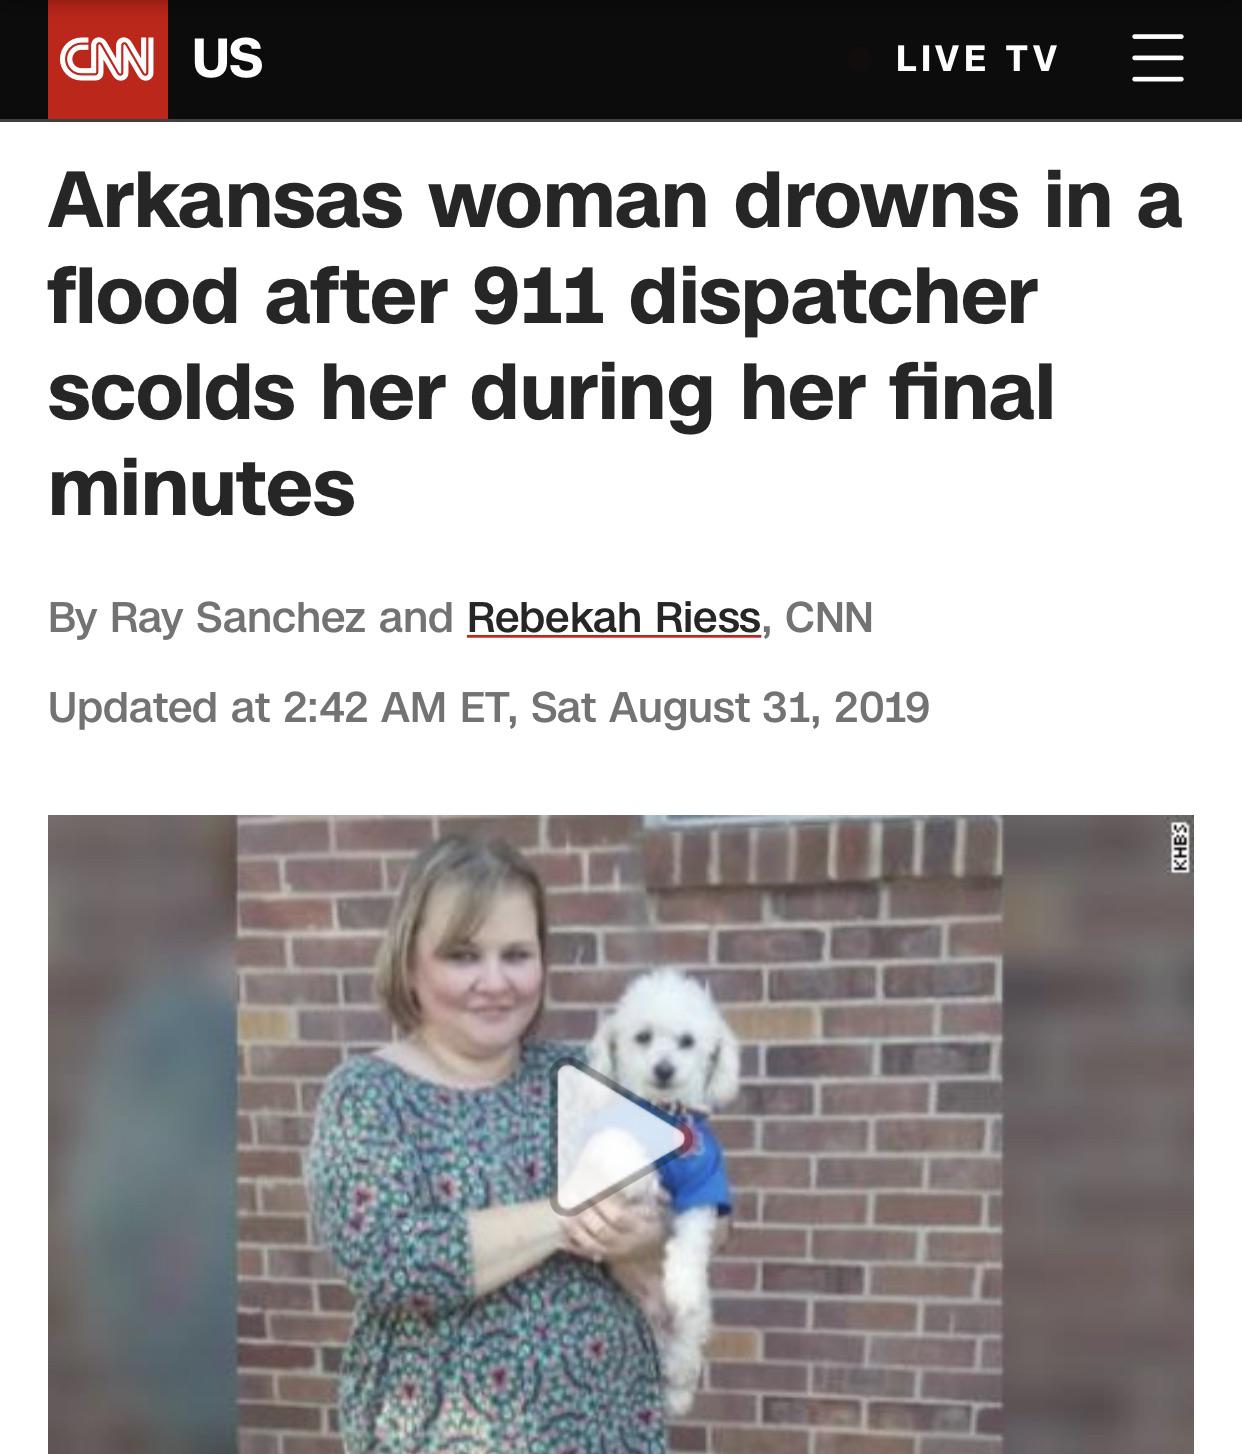 lotes de españa - Cnn Us Live Tv Arkansas woman drowns in a flood after 911 dispatcher scolds her during her final minutes By Ray Sanchez and Rebekah Riess, Cnn Updated at Et, Sat Khbs